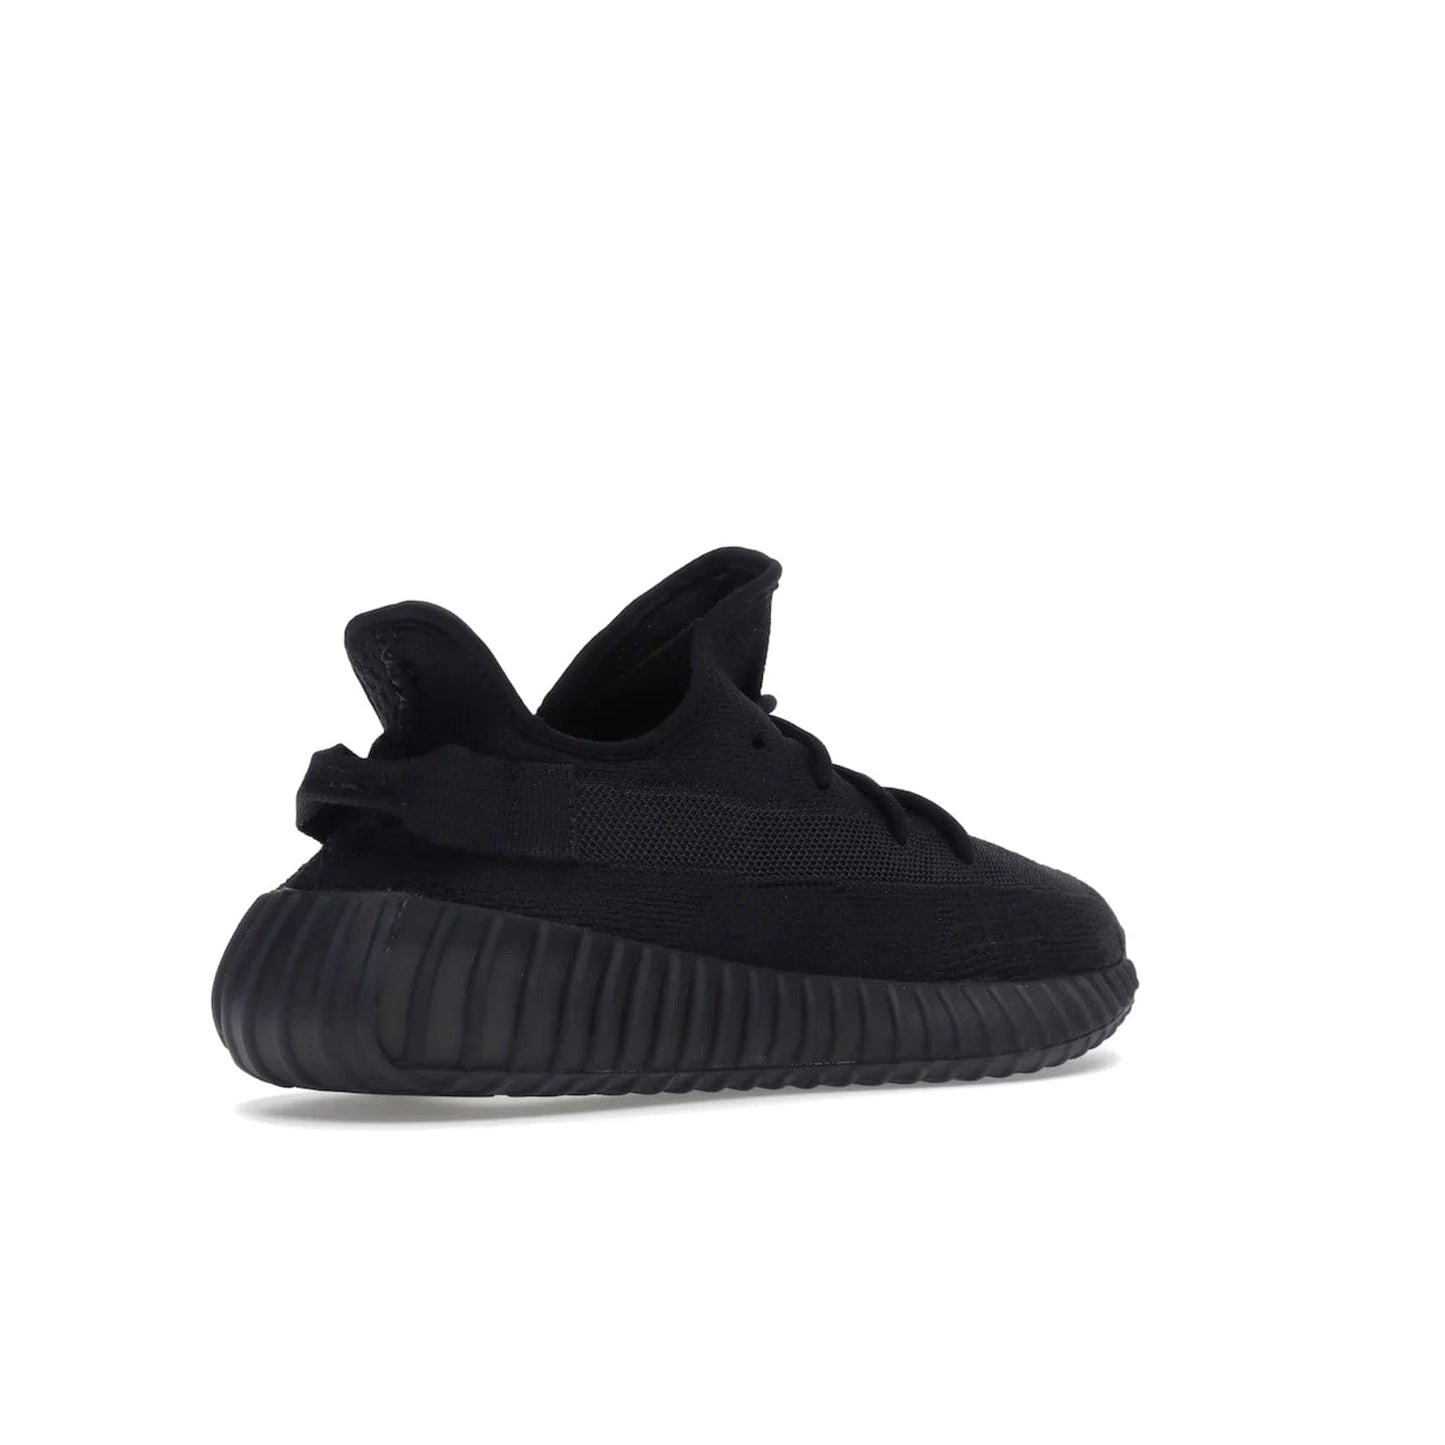 adidas Yeezy Boost 350 V2 Onyx - Image 33 - Only at www.BallersClubKickz.com - Adidas Yeezy Boost 350 V2 Onyx Triple Black shoes for comfort and style. Arriving Spring 2022.